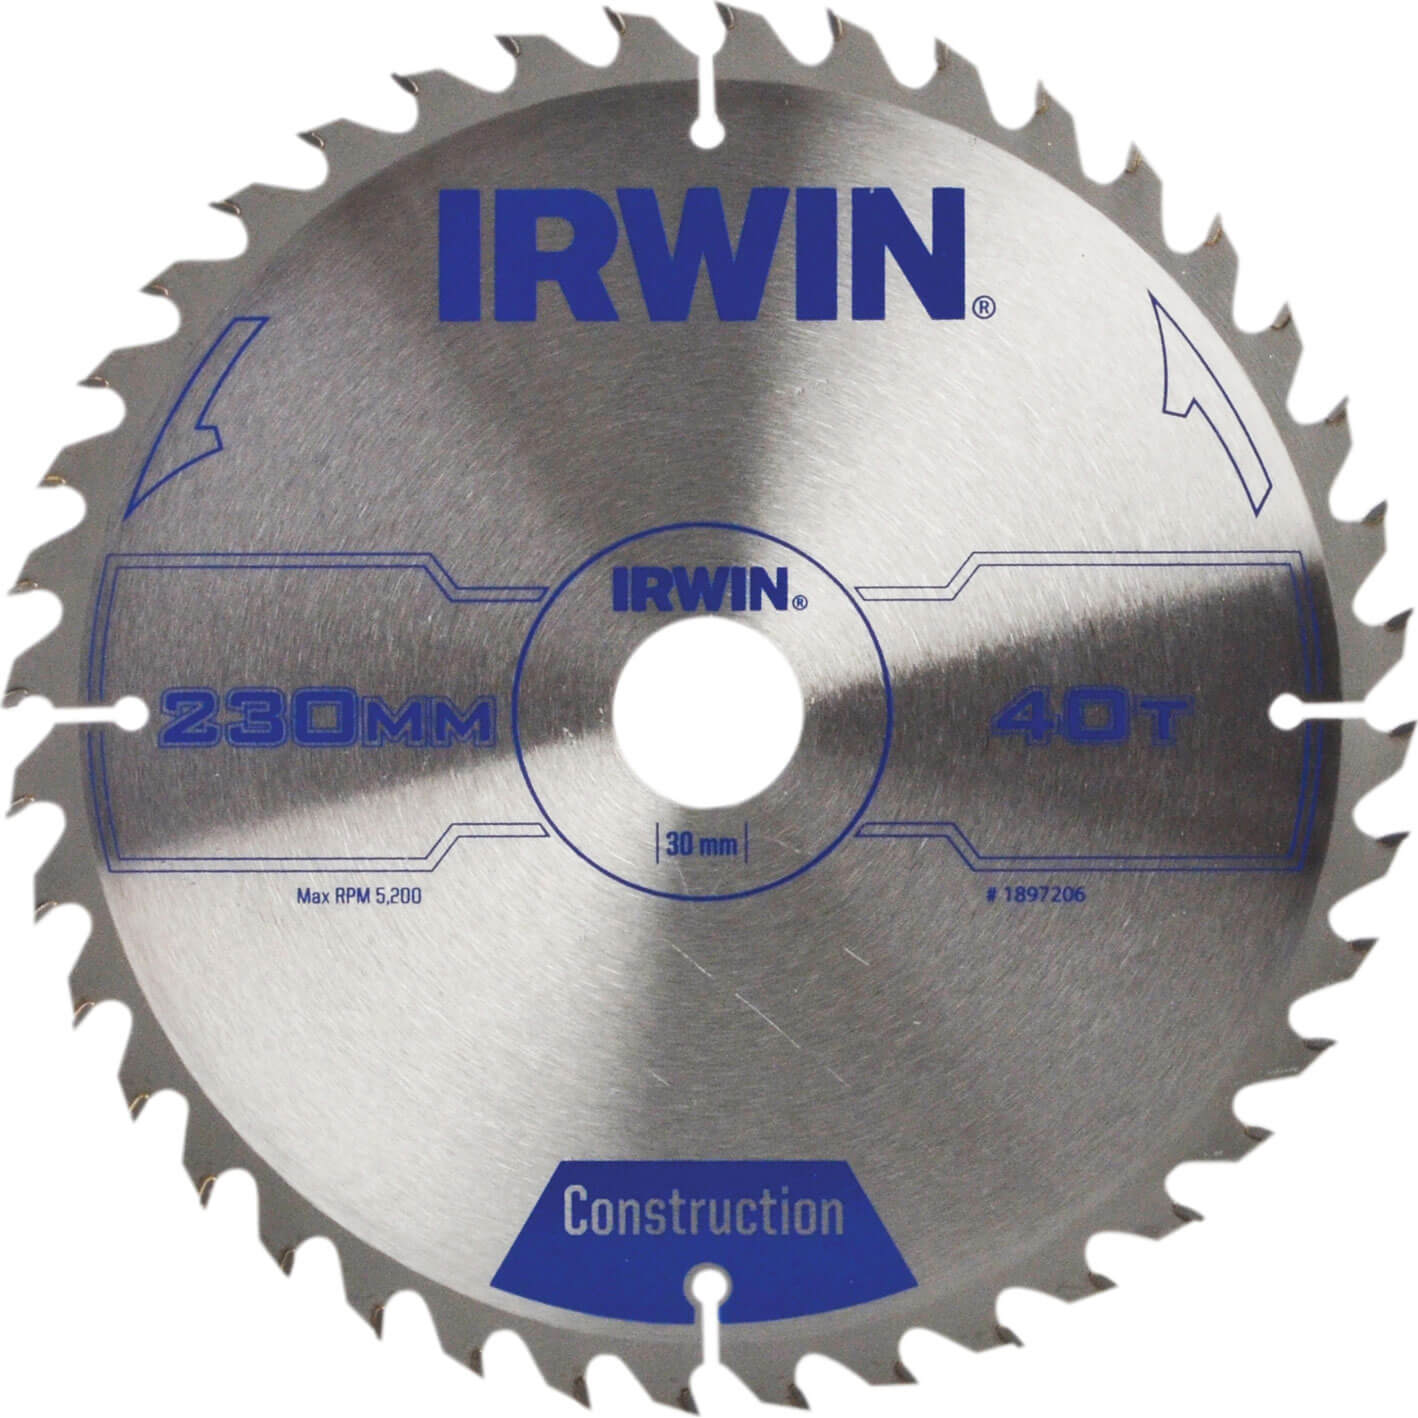 Image of Irwin ATB Construction Circular Saw Blade 230mm 40T 30mm